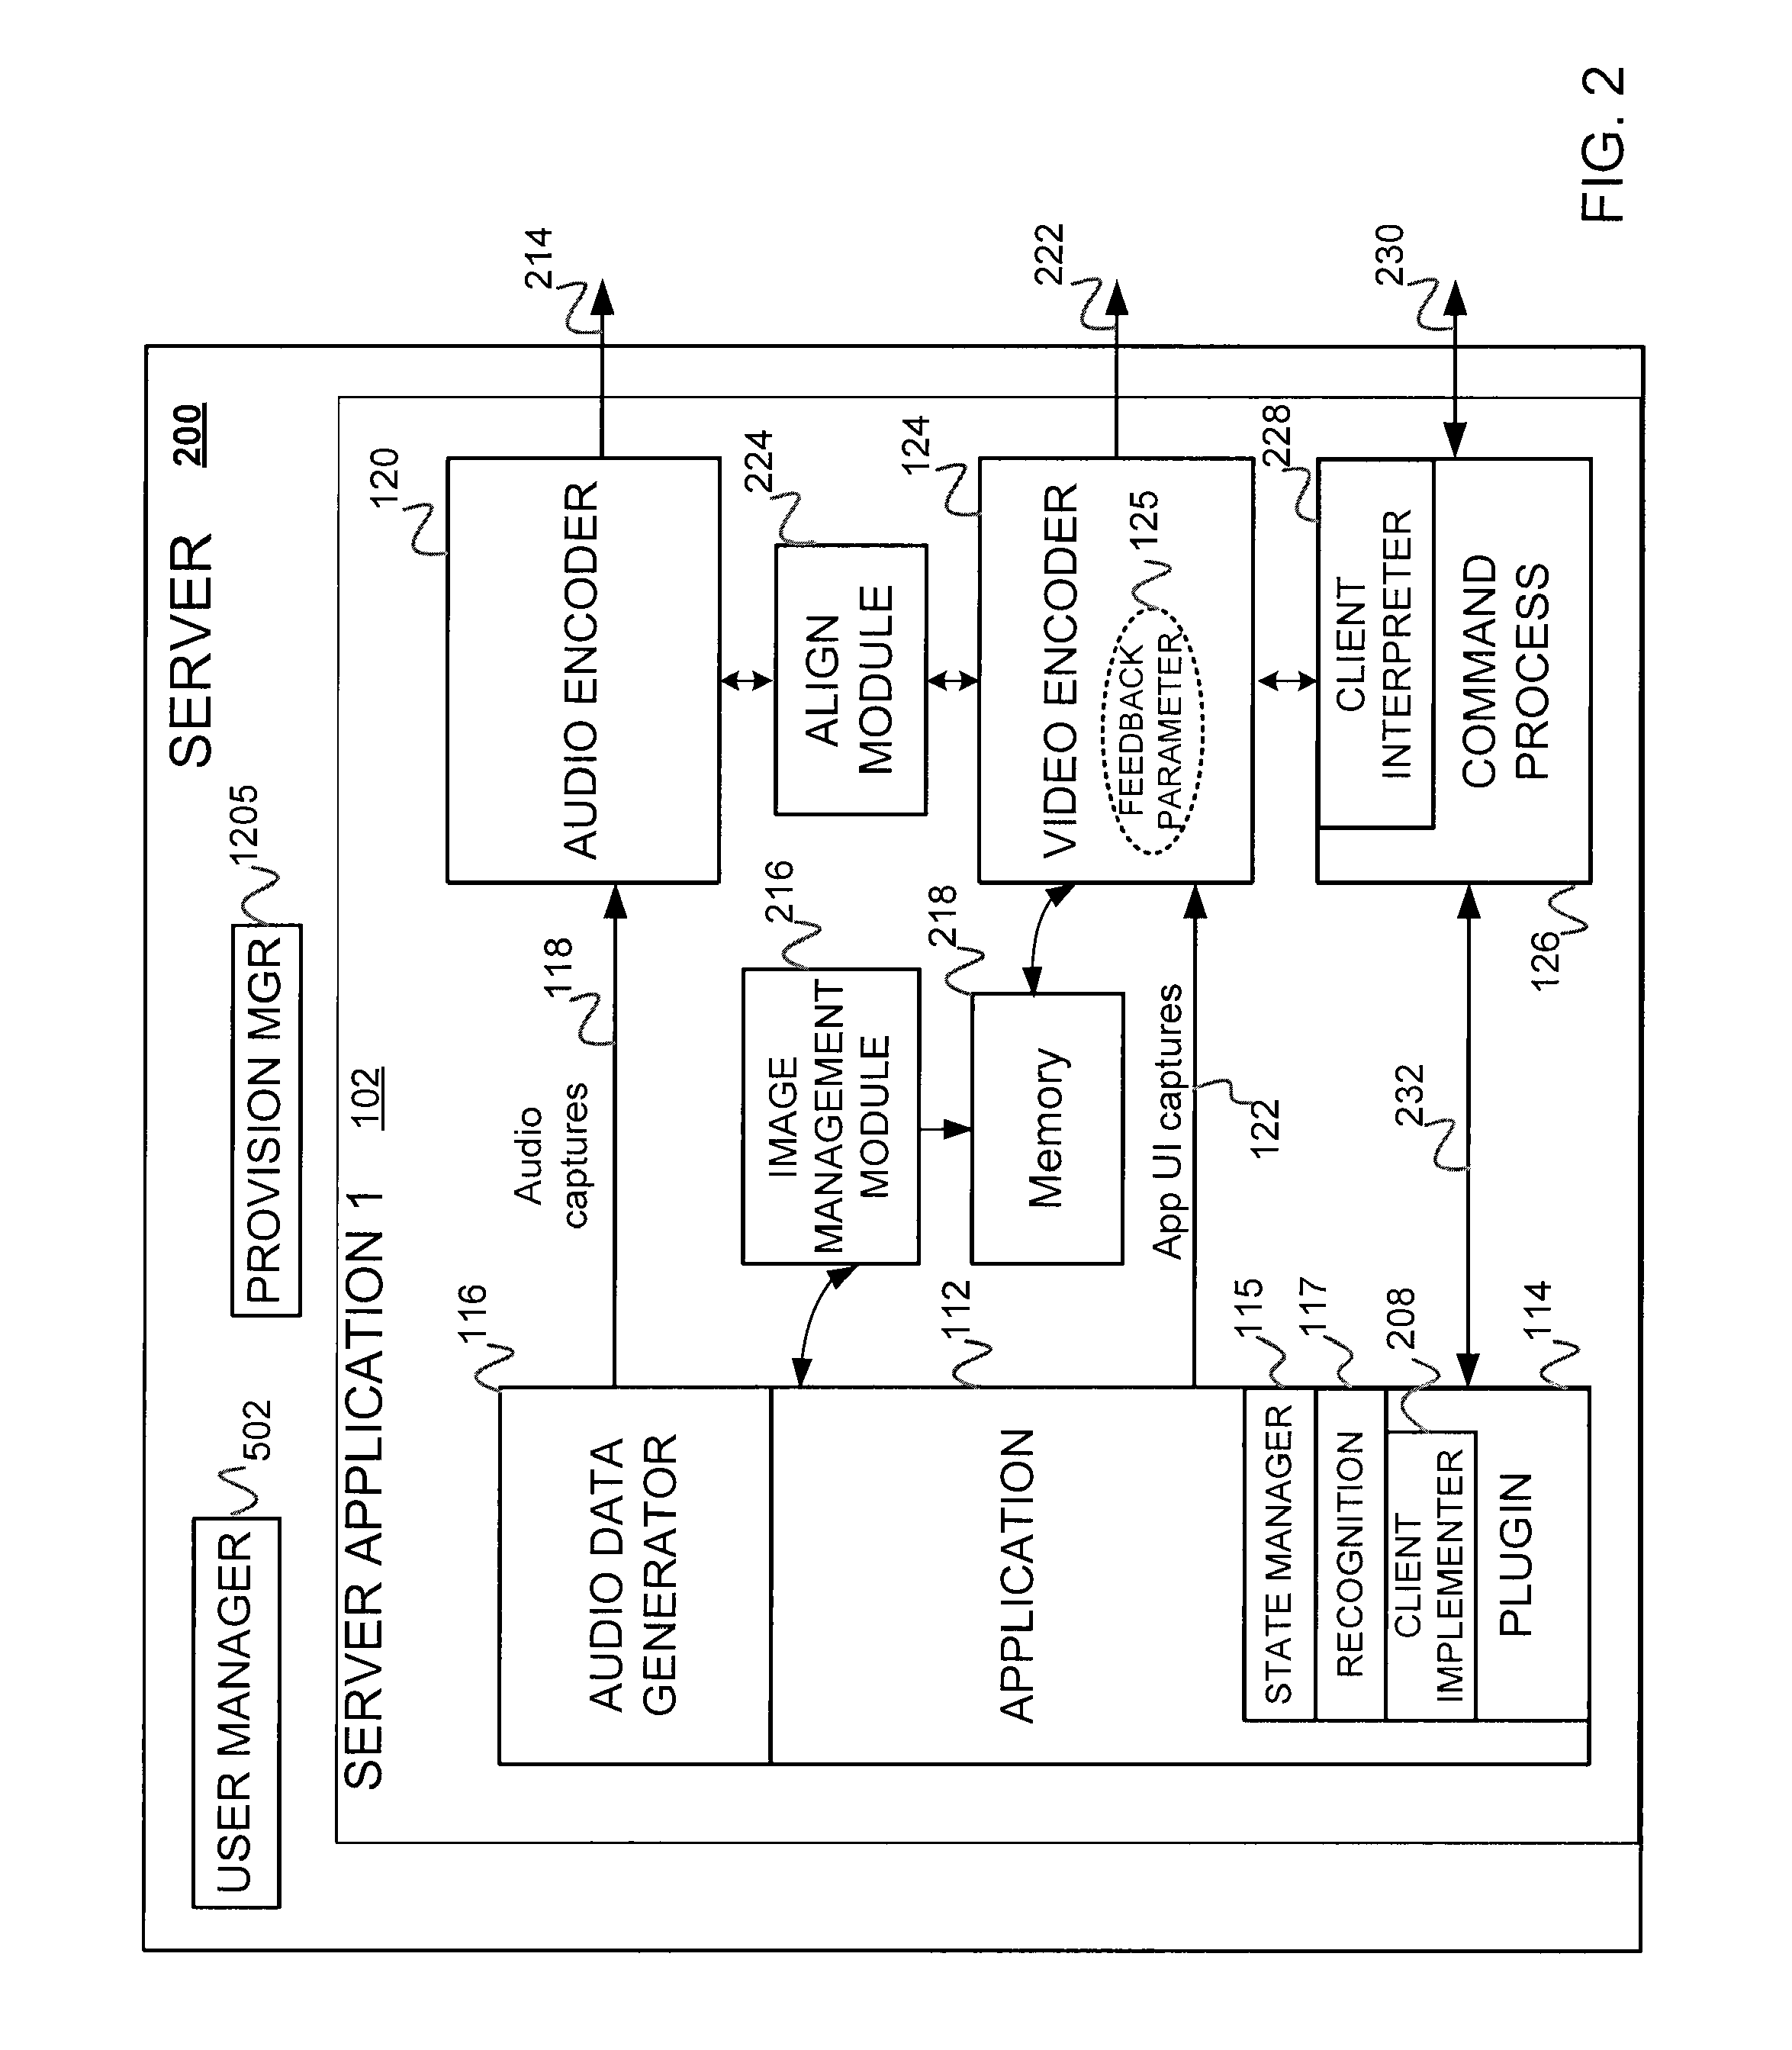 Mobile device user interface for remote interaction